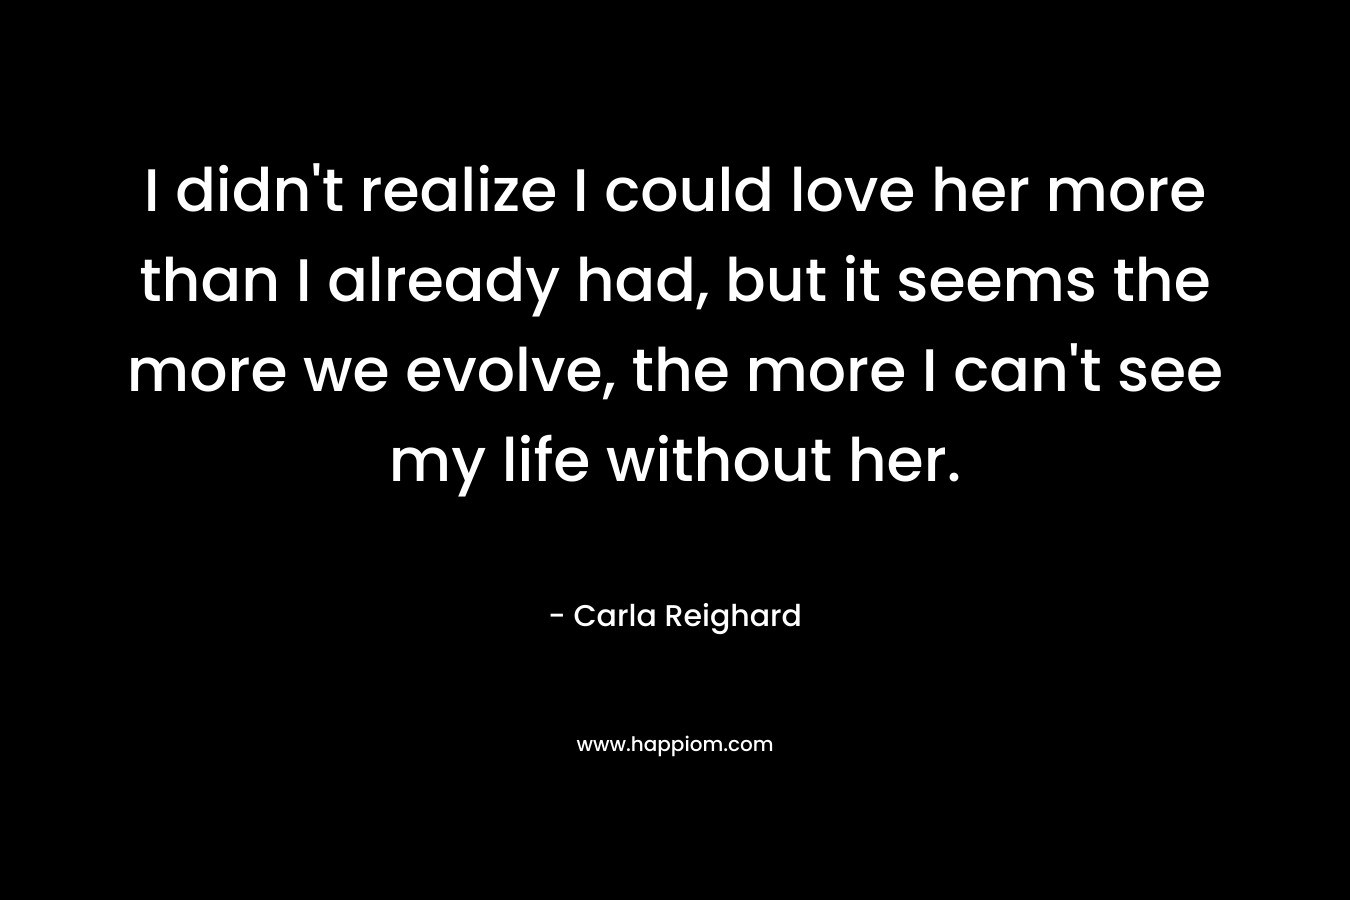 I didn’t realize I could love her more than I already had, but it seems the more we evolve, the more I can’t see my life without her. – Carla Reighard